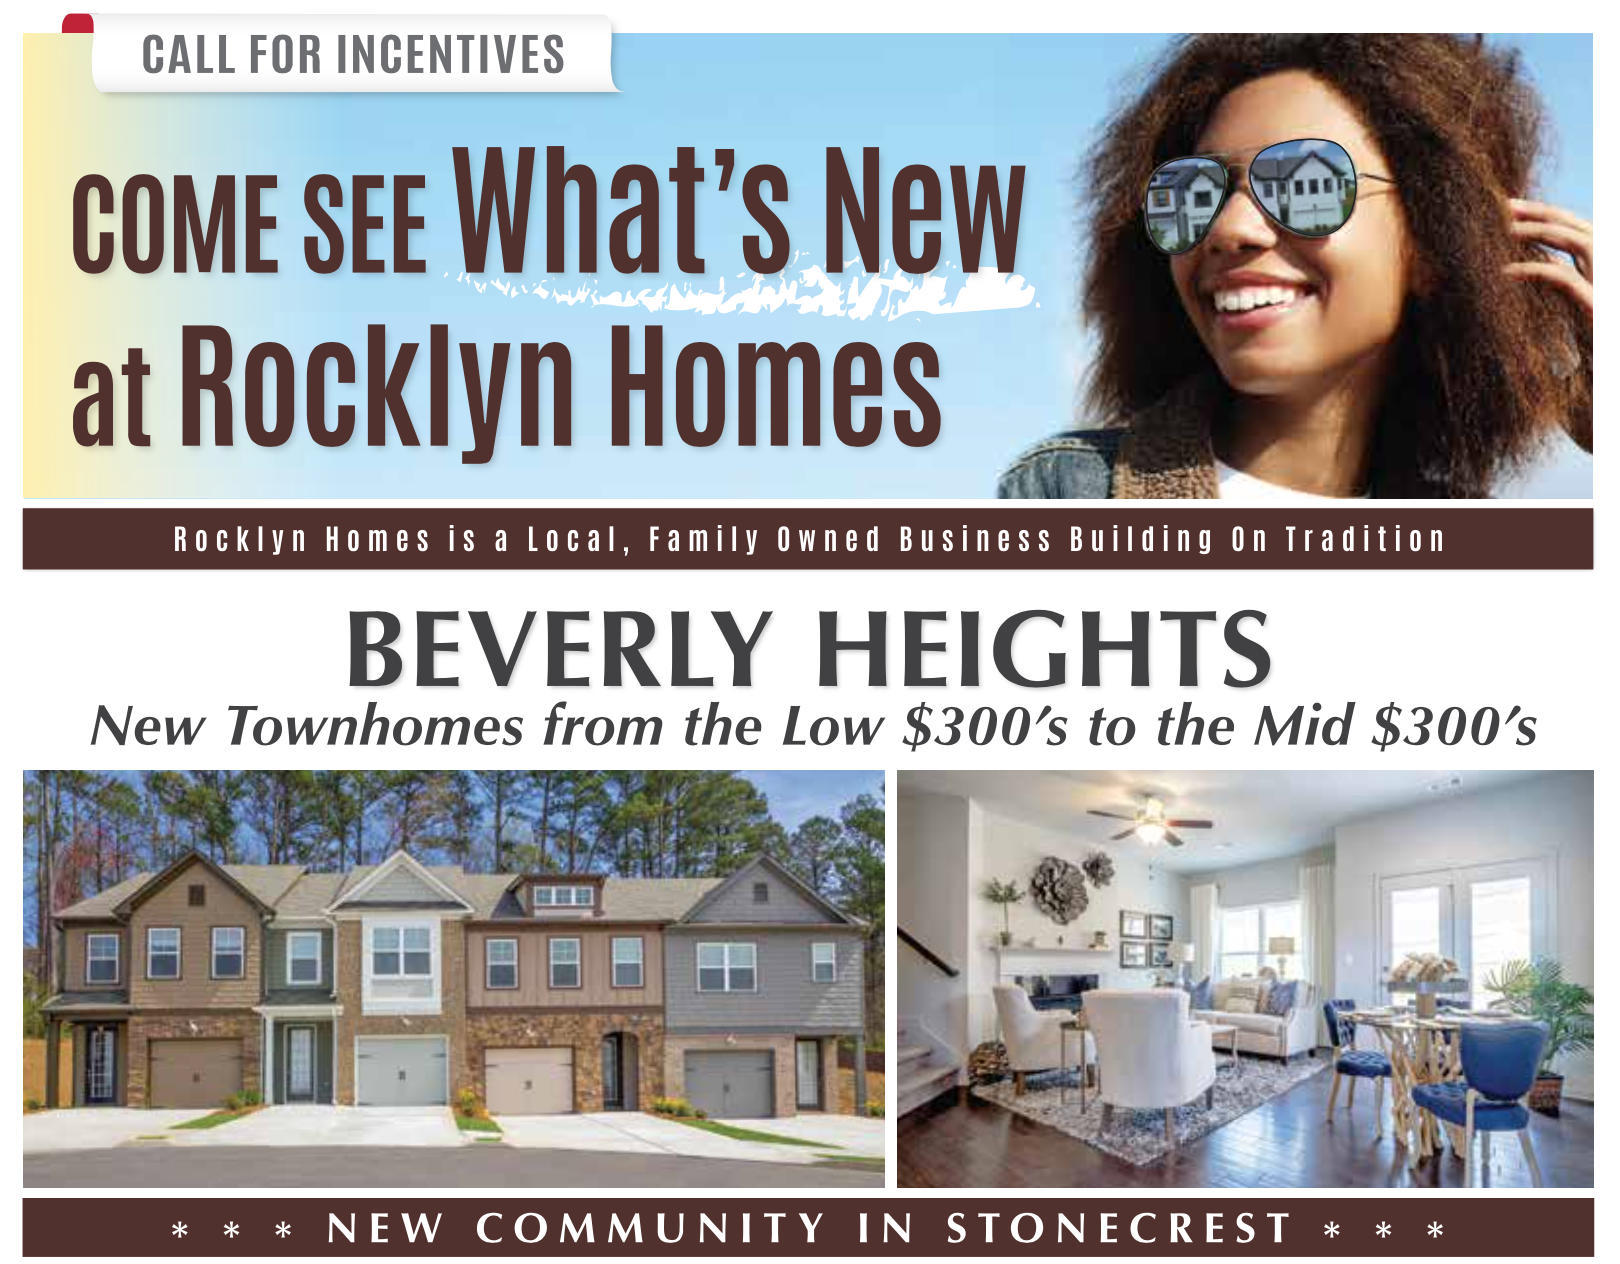 Beverly heights incentives flyer